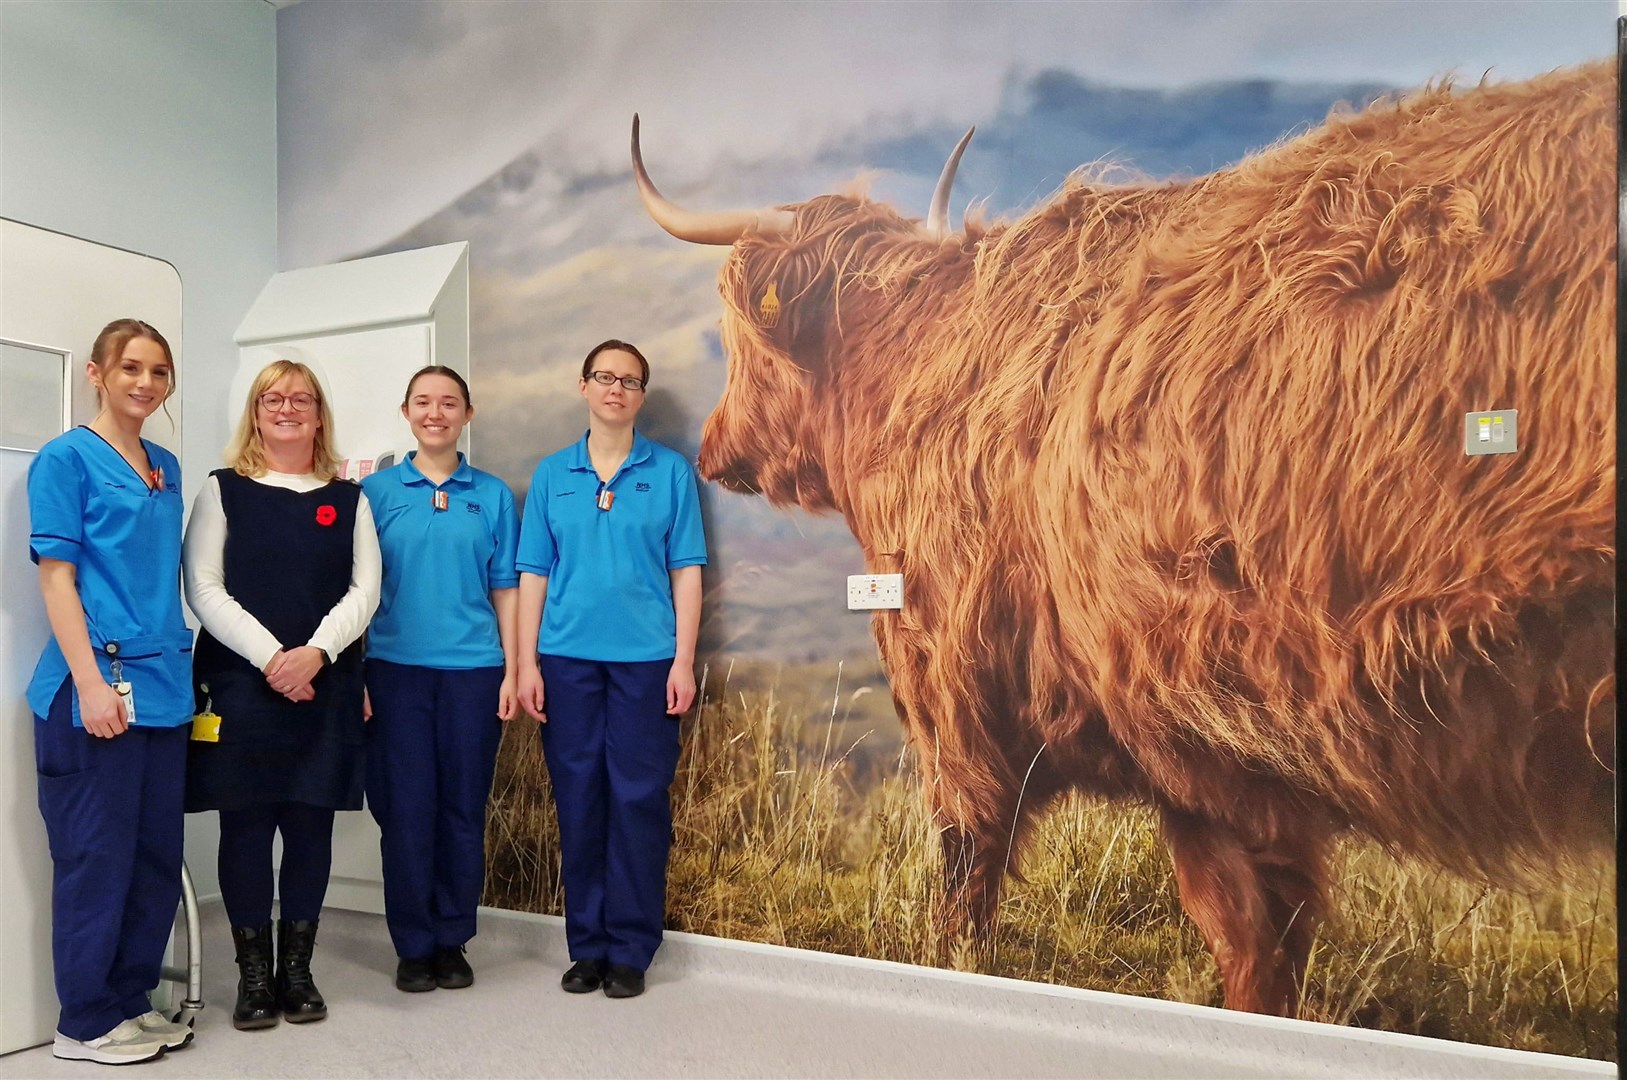 Enjoying the mural of the Highland cow, from left, Megan Mcgowan, (radiographer), Morag Howard (radiology site superintendent), Mhairi Maclean, (radiographer) and Laura Griffiths, (radiographer).